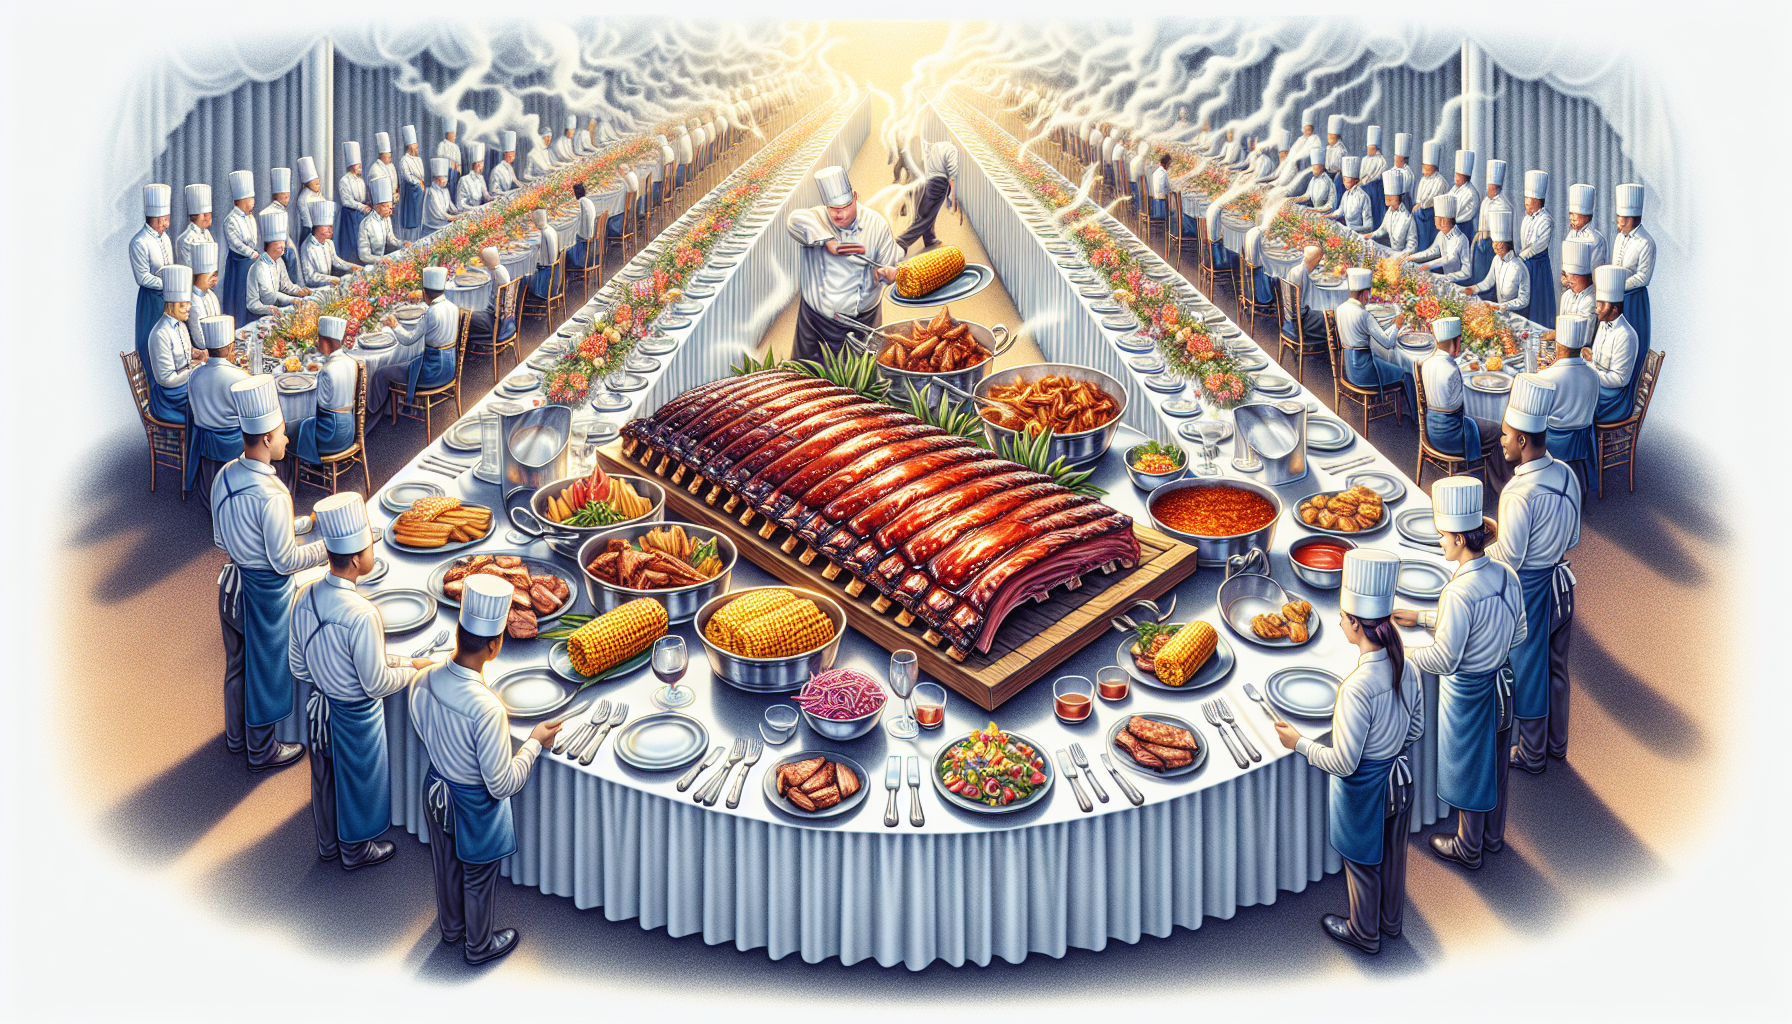 Illustration of a beautifully set BBQ catering table with various dishes and utensils